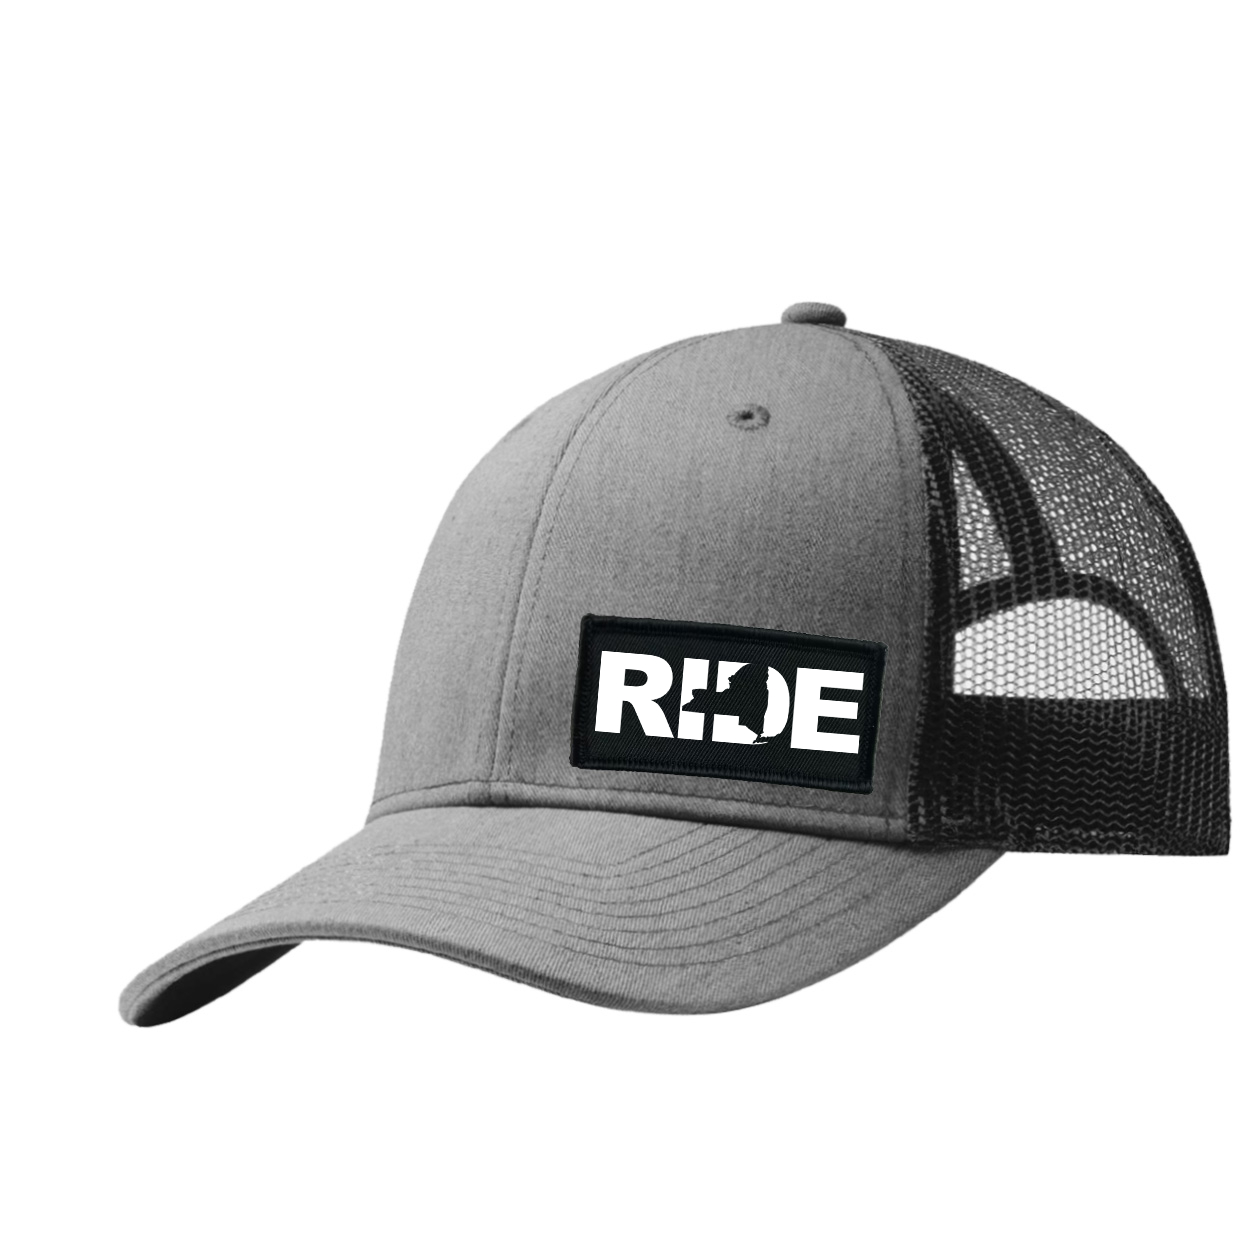 Ride New York Night Out Woven Patch Snapback Trucker Hat Heather Gray/Black (White Logo)